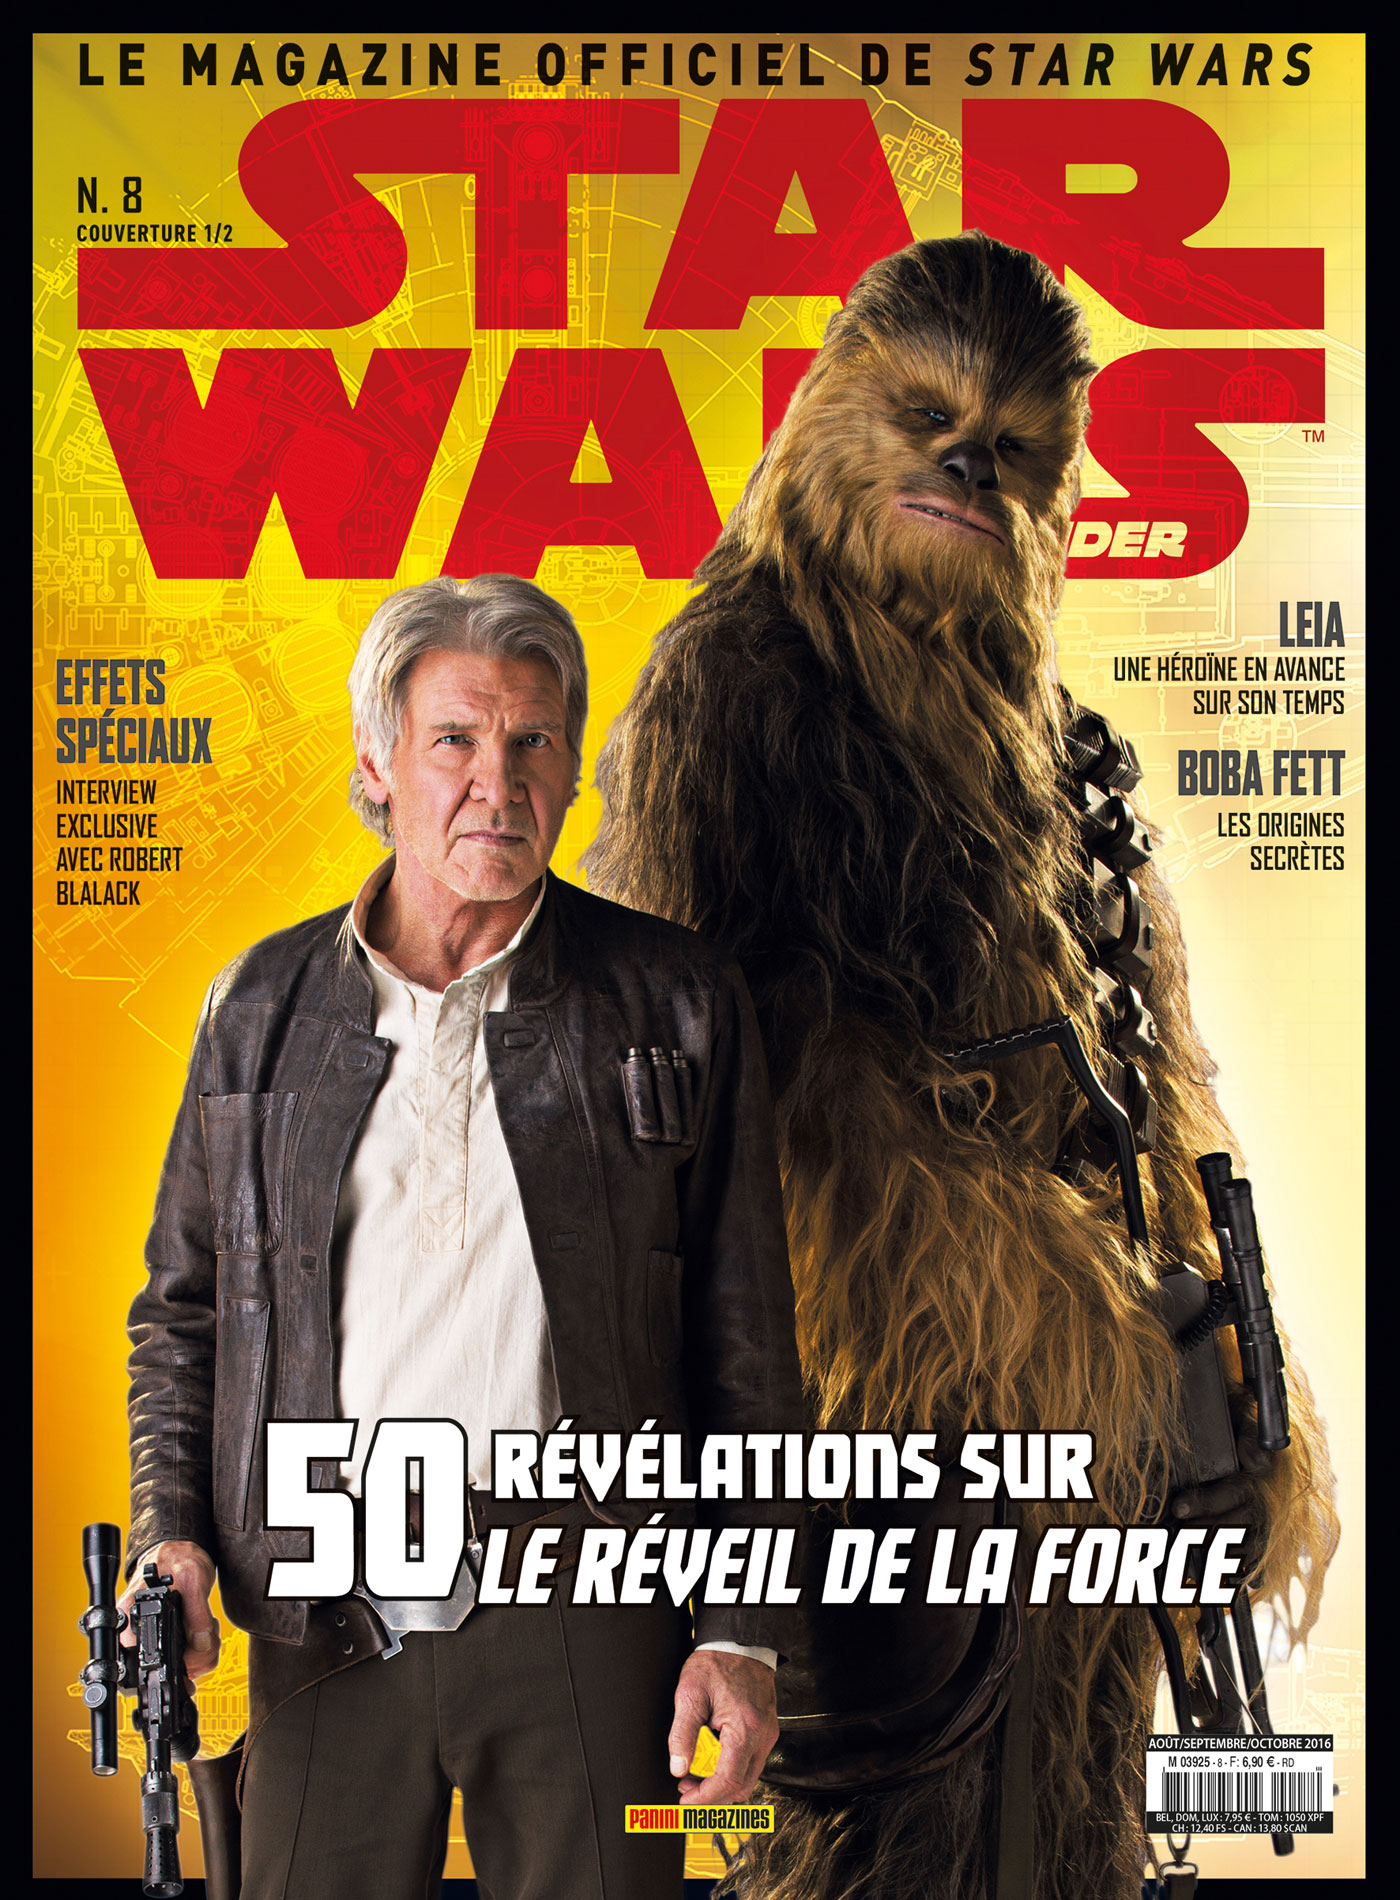 Star Wars Insider 8 - Couverture A